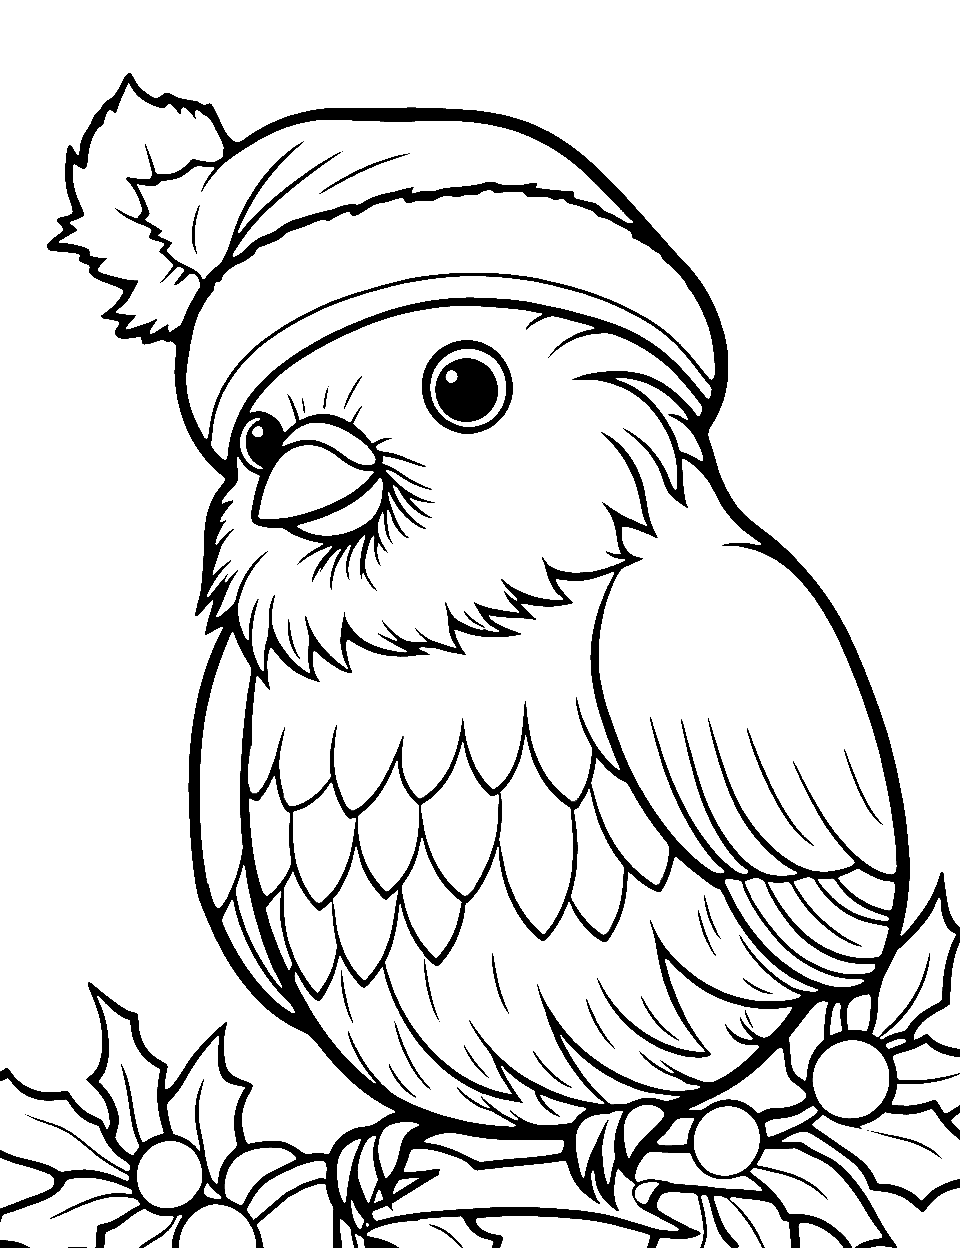 Christmas Robin Coloring Page - A robin with a tiny Santa hat celebrating Christmas.